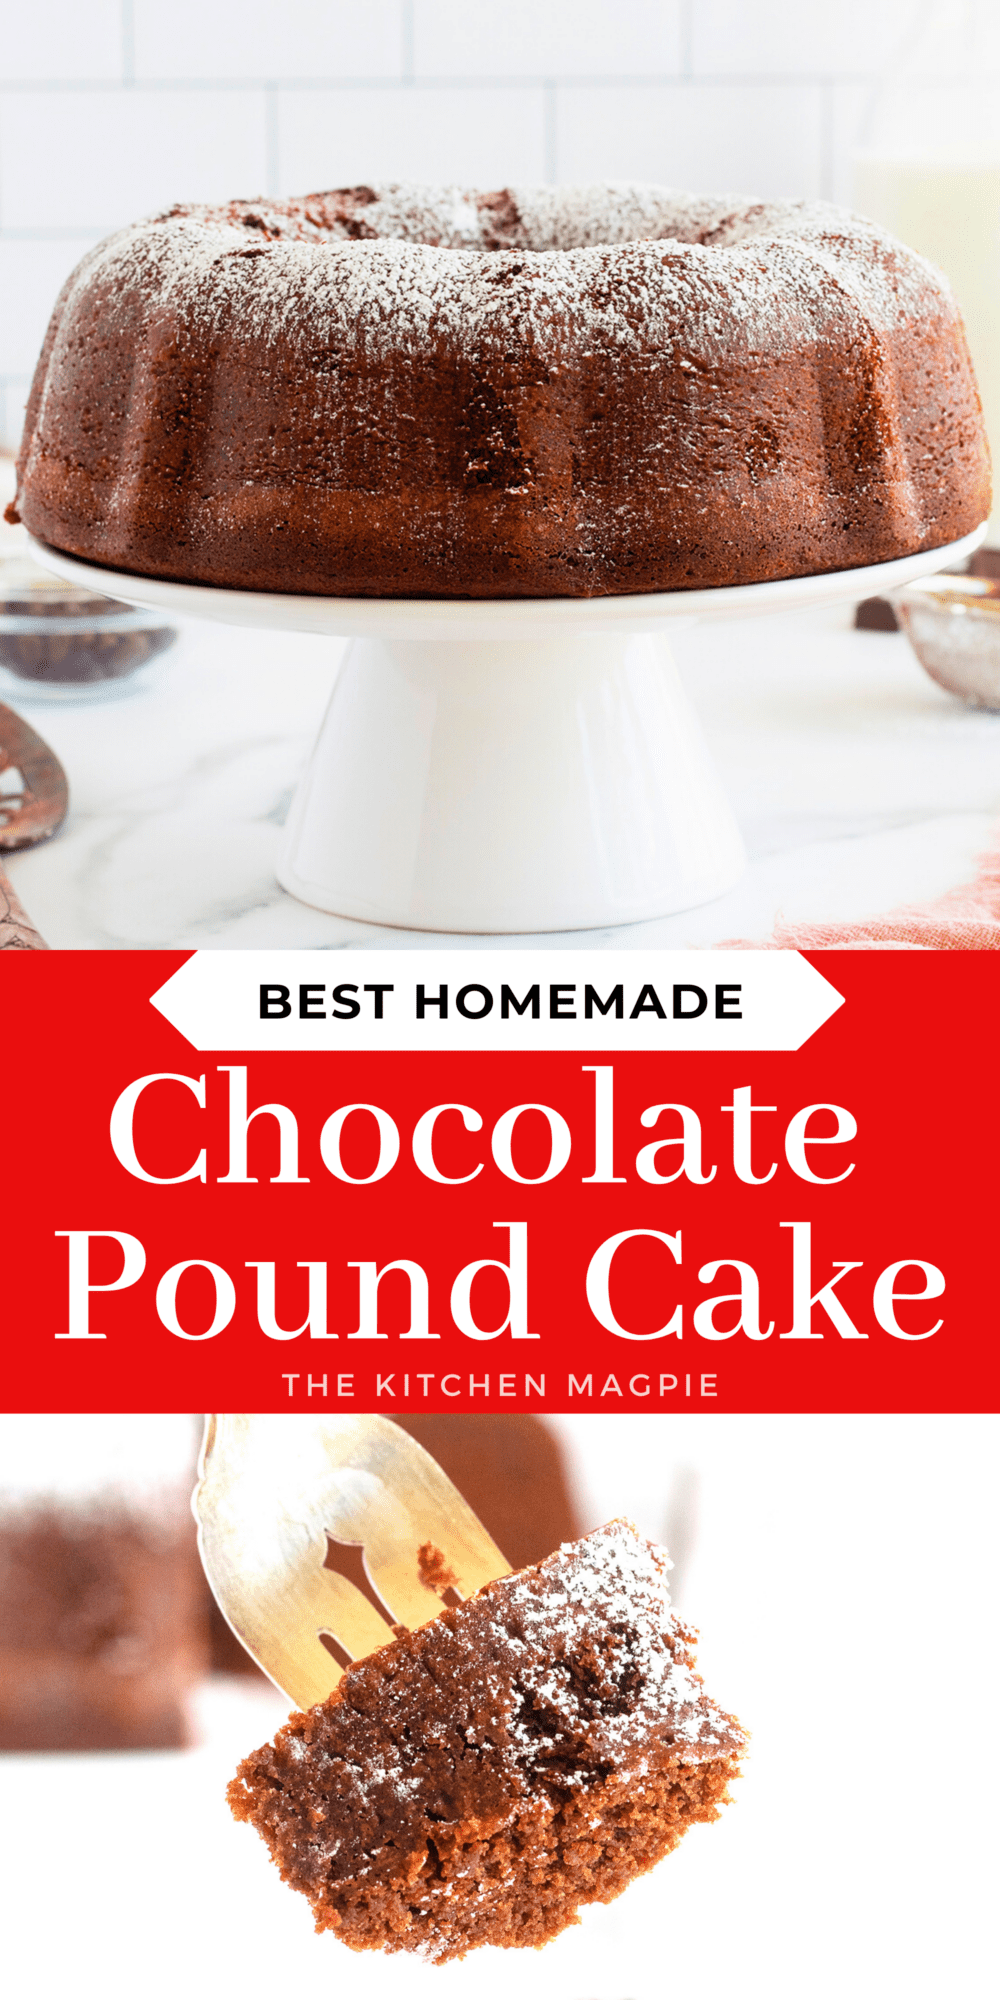 Pound cake might be the densest, tastiest, and most filling cake you bake at home. With the addition of a little bit of chocolate and coffee, however, it can become even tastier!